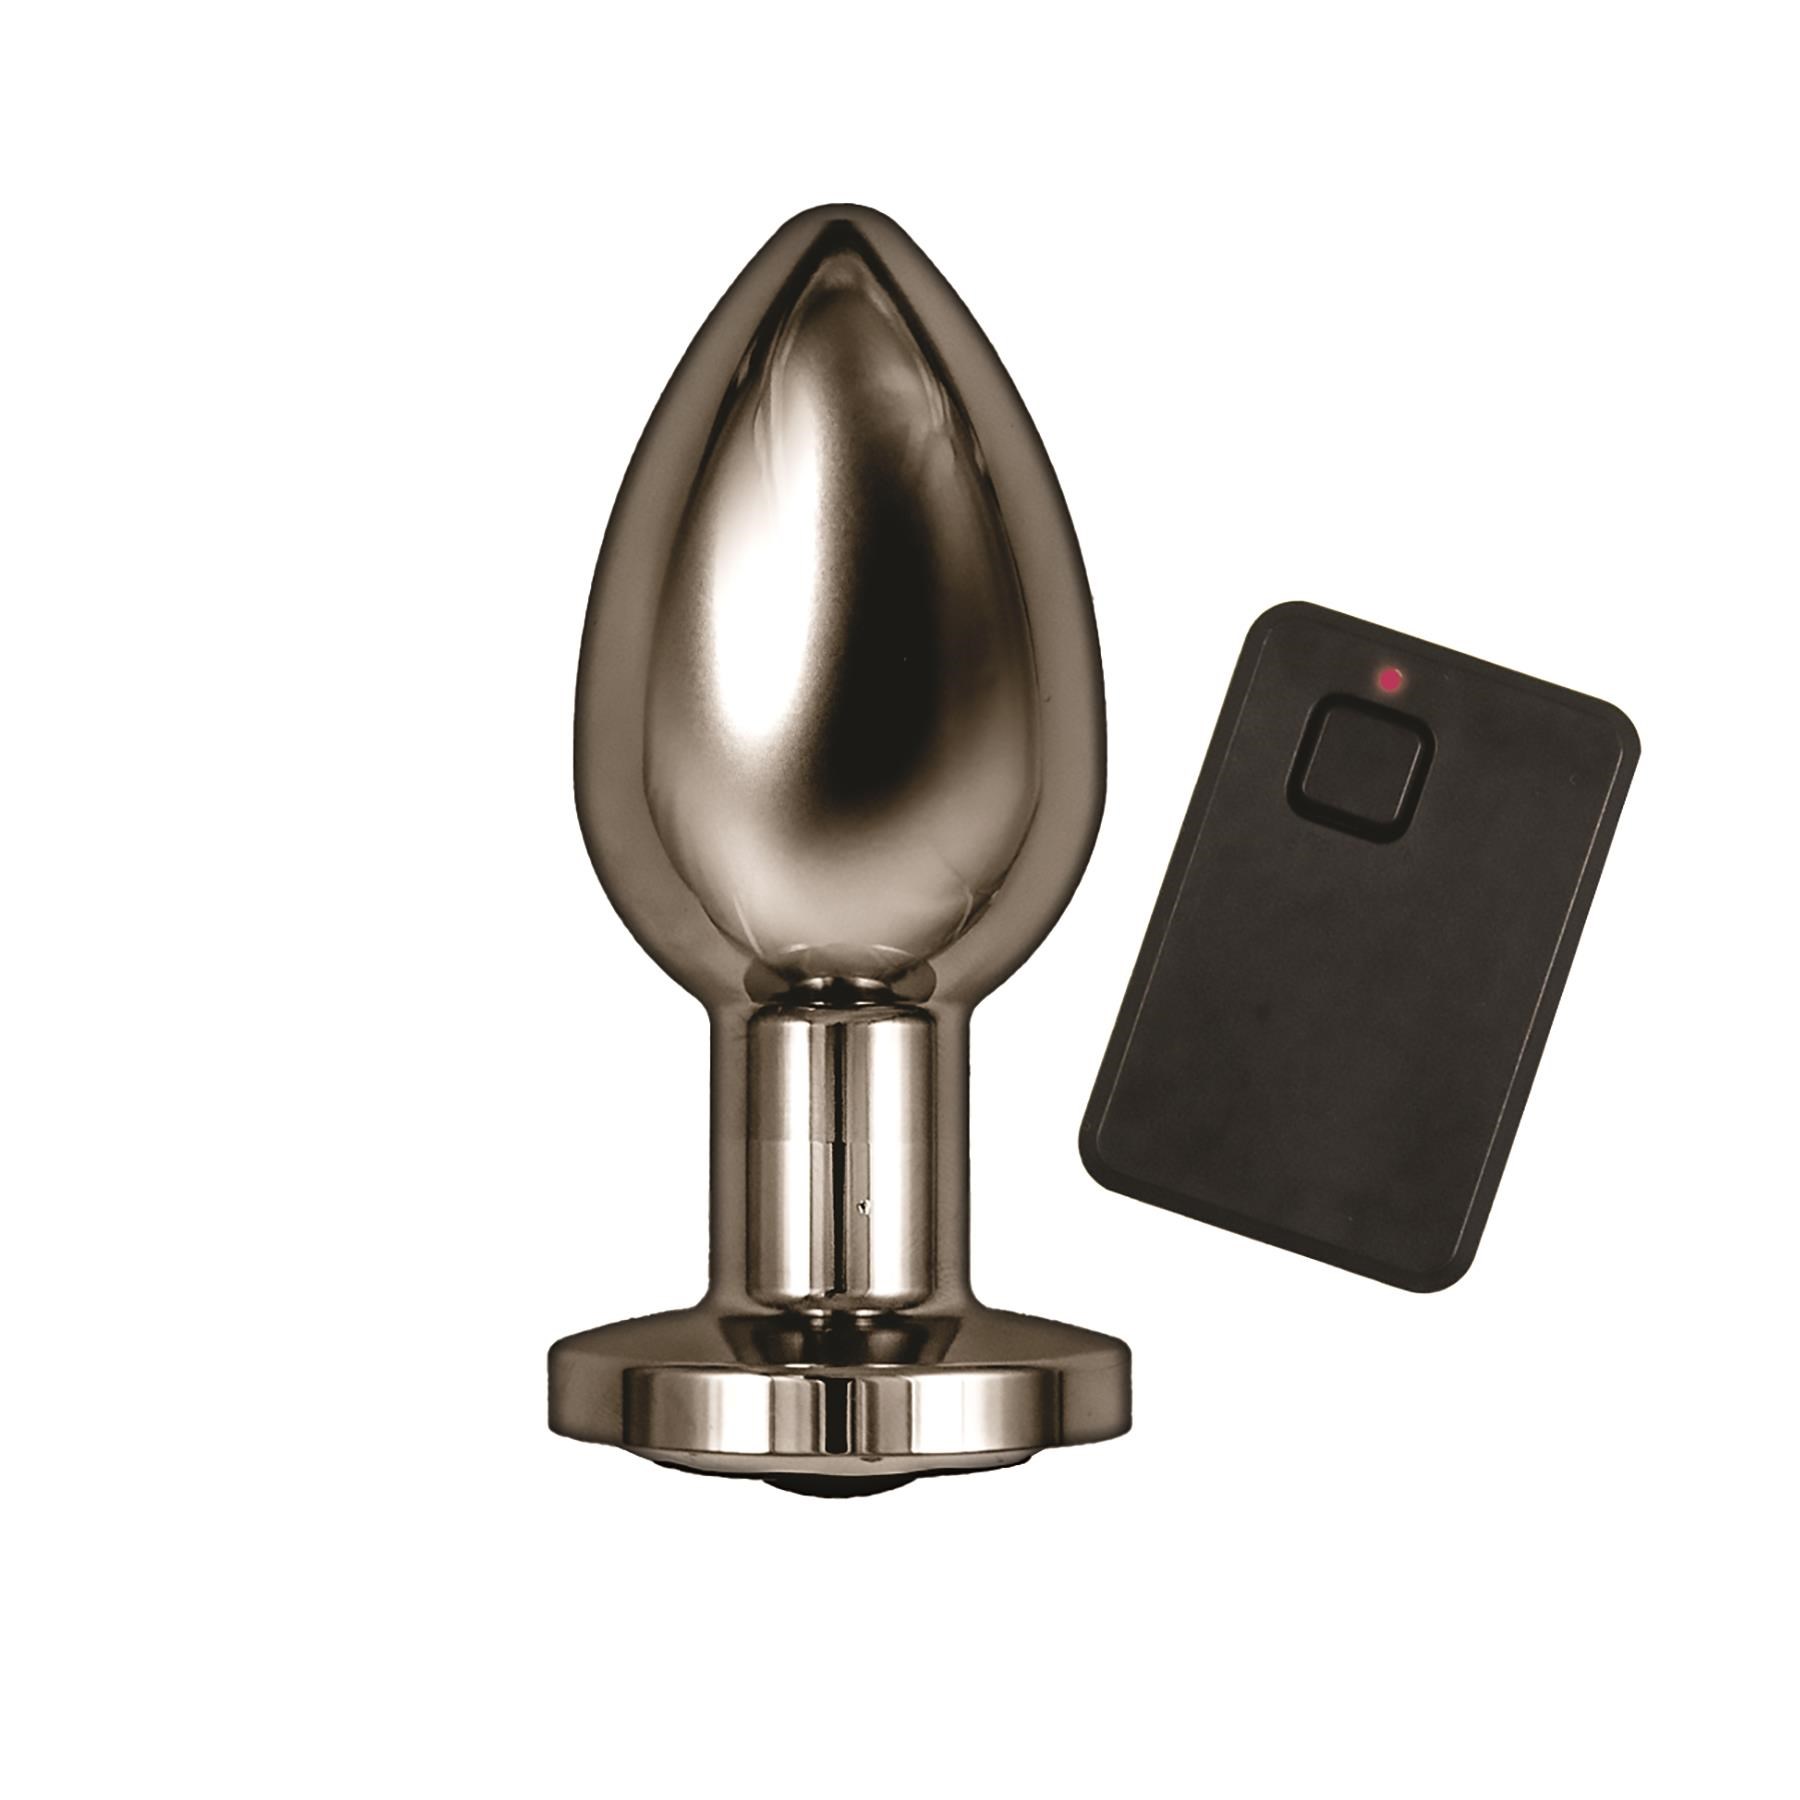 Ass-Sation Vibrating Metal Anal Plug with Remote Control - Butt Plug and Remote